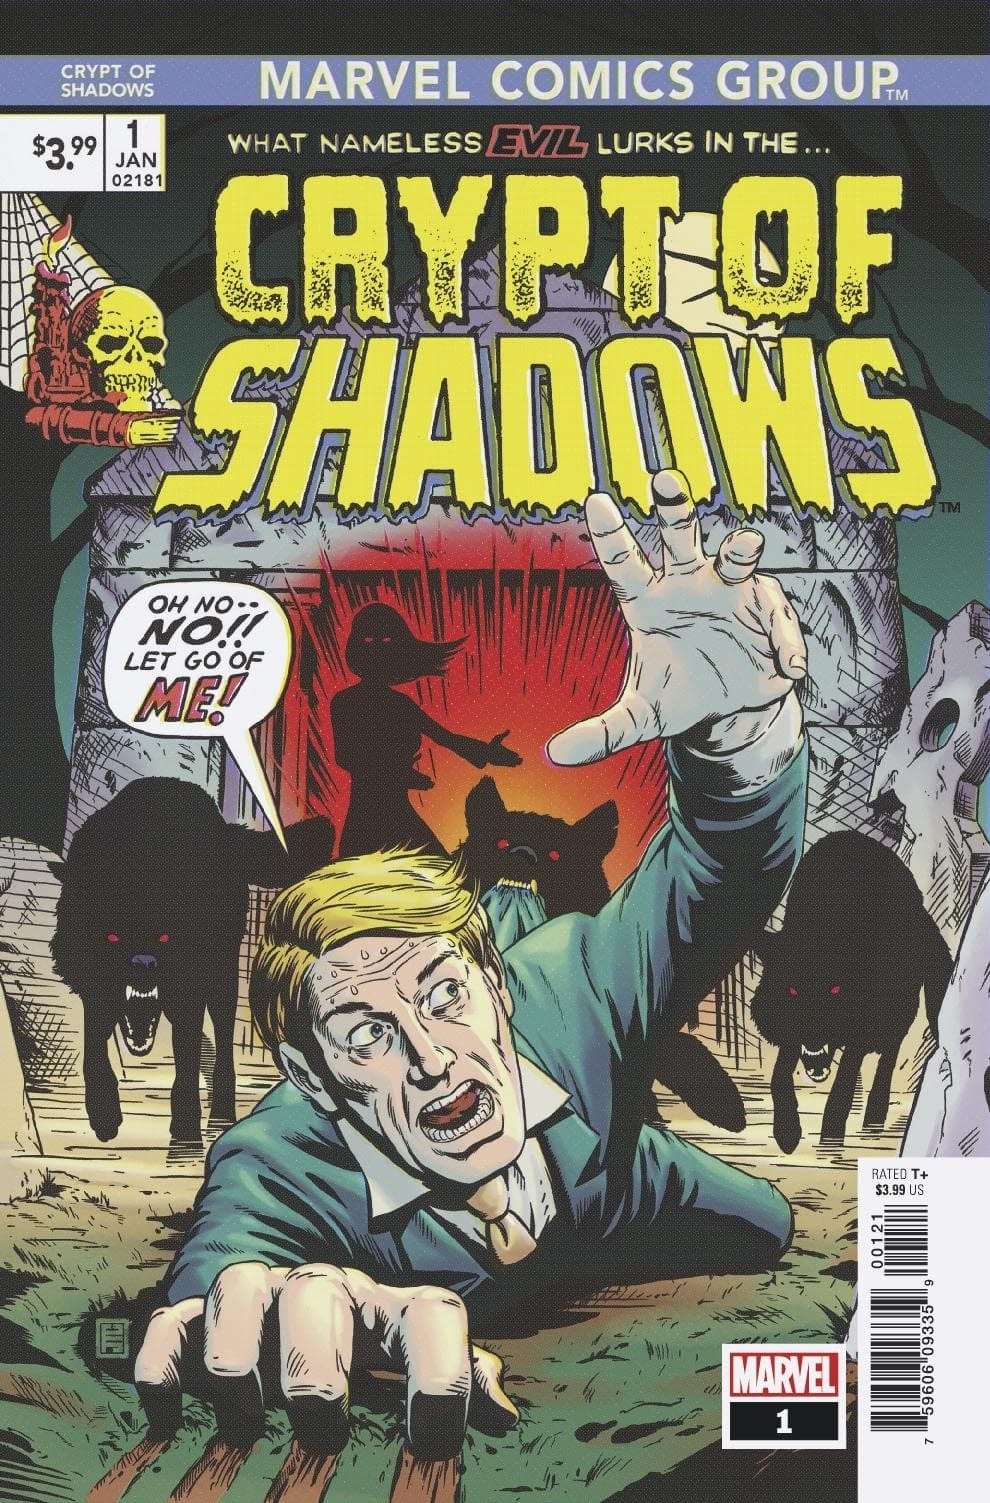 A Great Comics Tradition Continued in Next Week's Crypt of Shadows #1